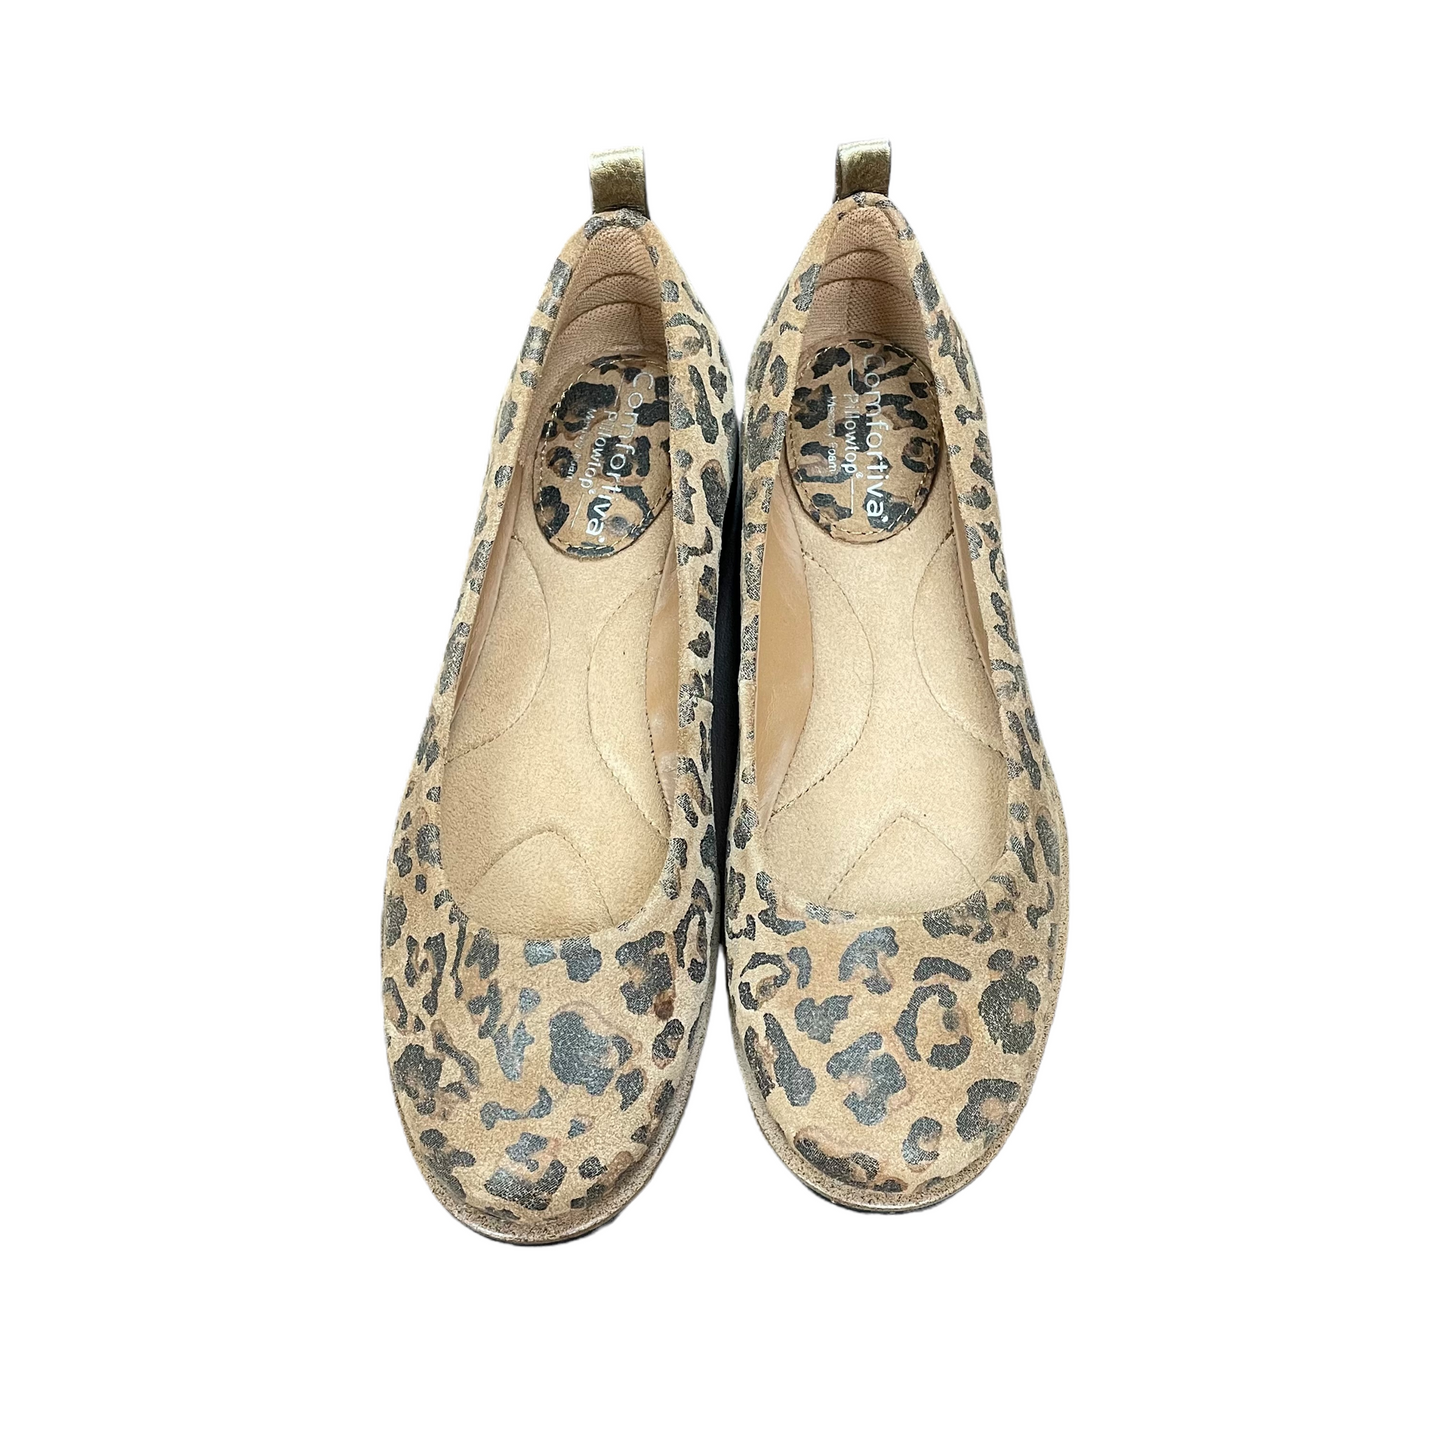 Animal Print Shoes Flats By Comfortiva, Size: 7